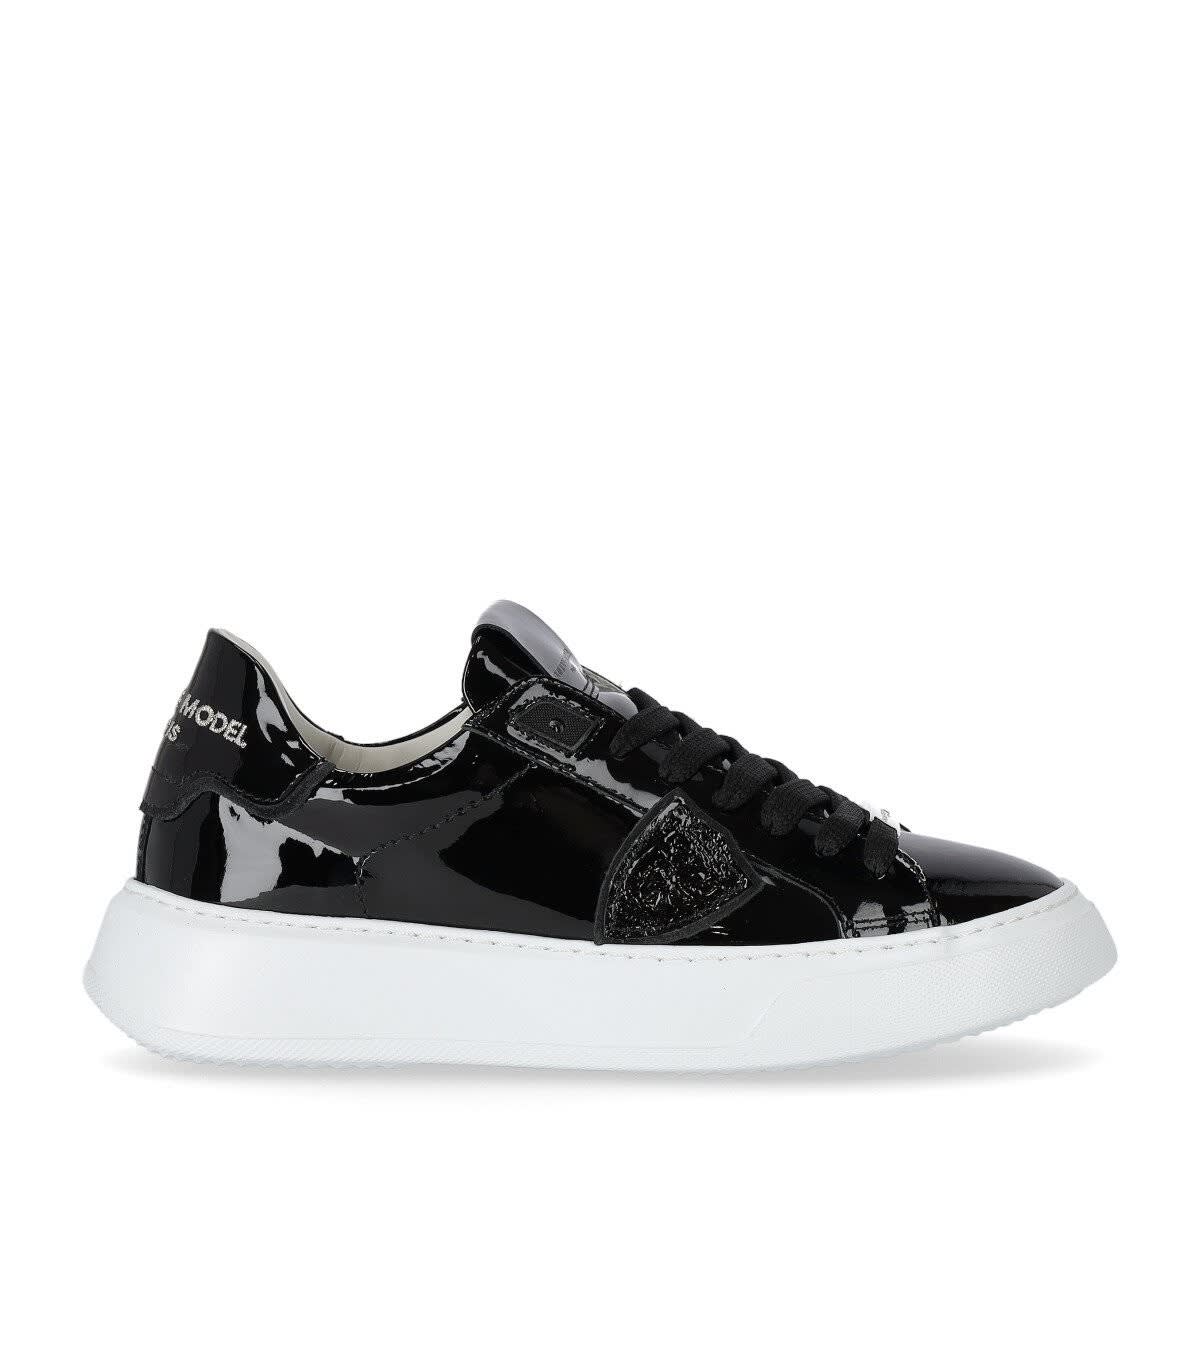 Philippe Model Temple Black Patent Leather Sneaker